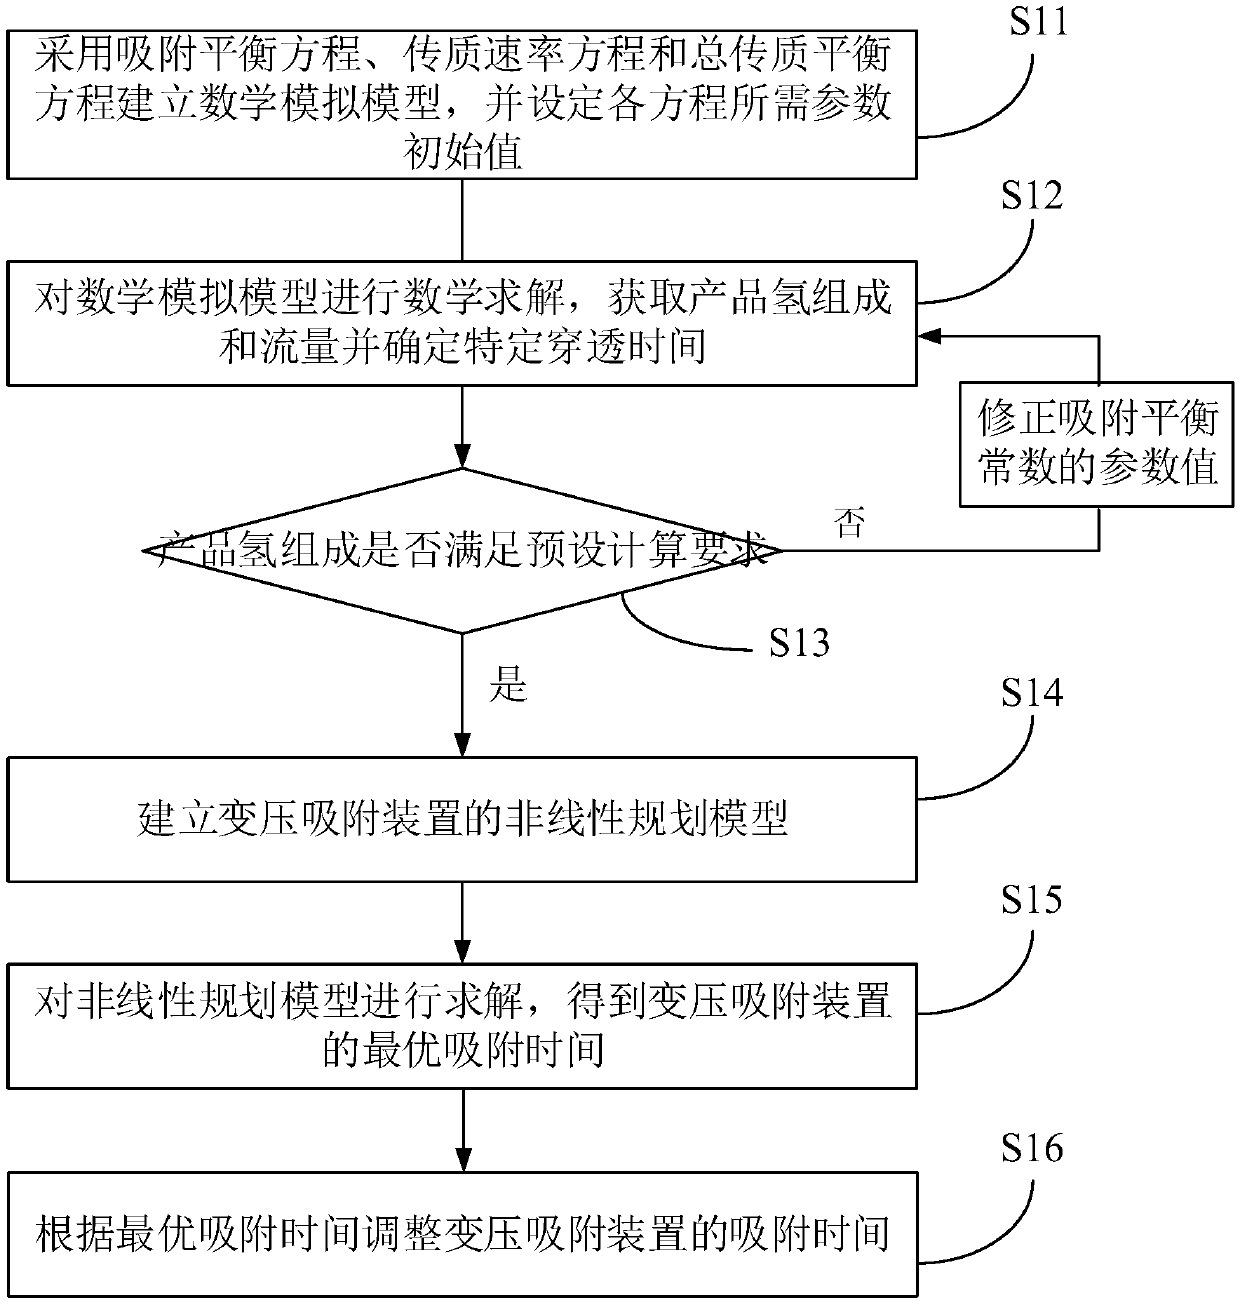 Storage device, pressure swing adsorption device optimization method, device and equipment